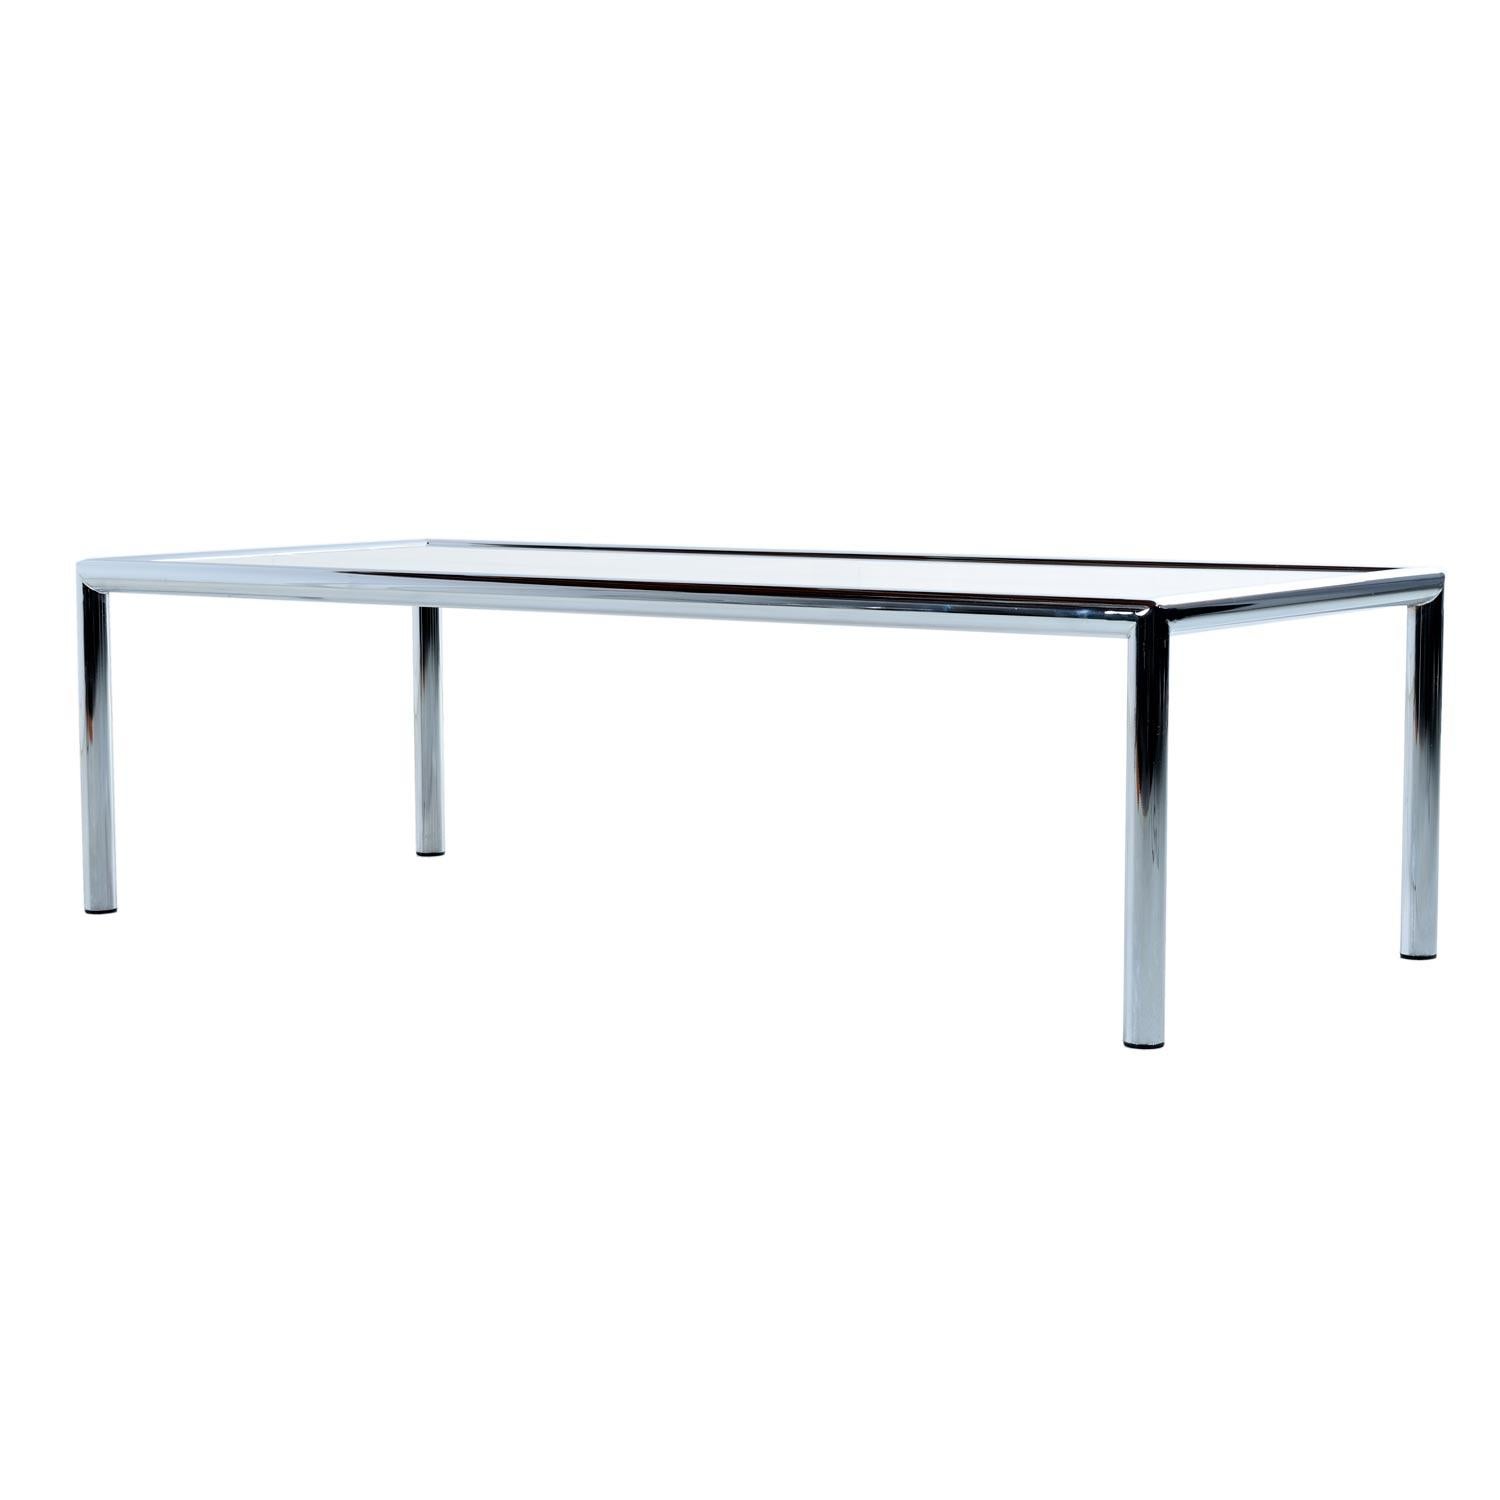 You won't find a finer example of this splendiferous coffee table anywhere. Designed for Design Institute. The tubular chromed aluminum frame creates colossal strength while keeping weight to a minimum. The polished finish contrasts perfectly